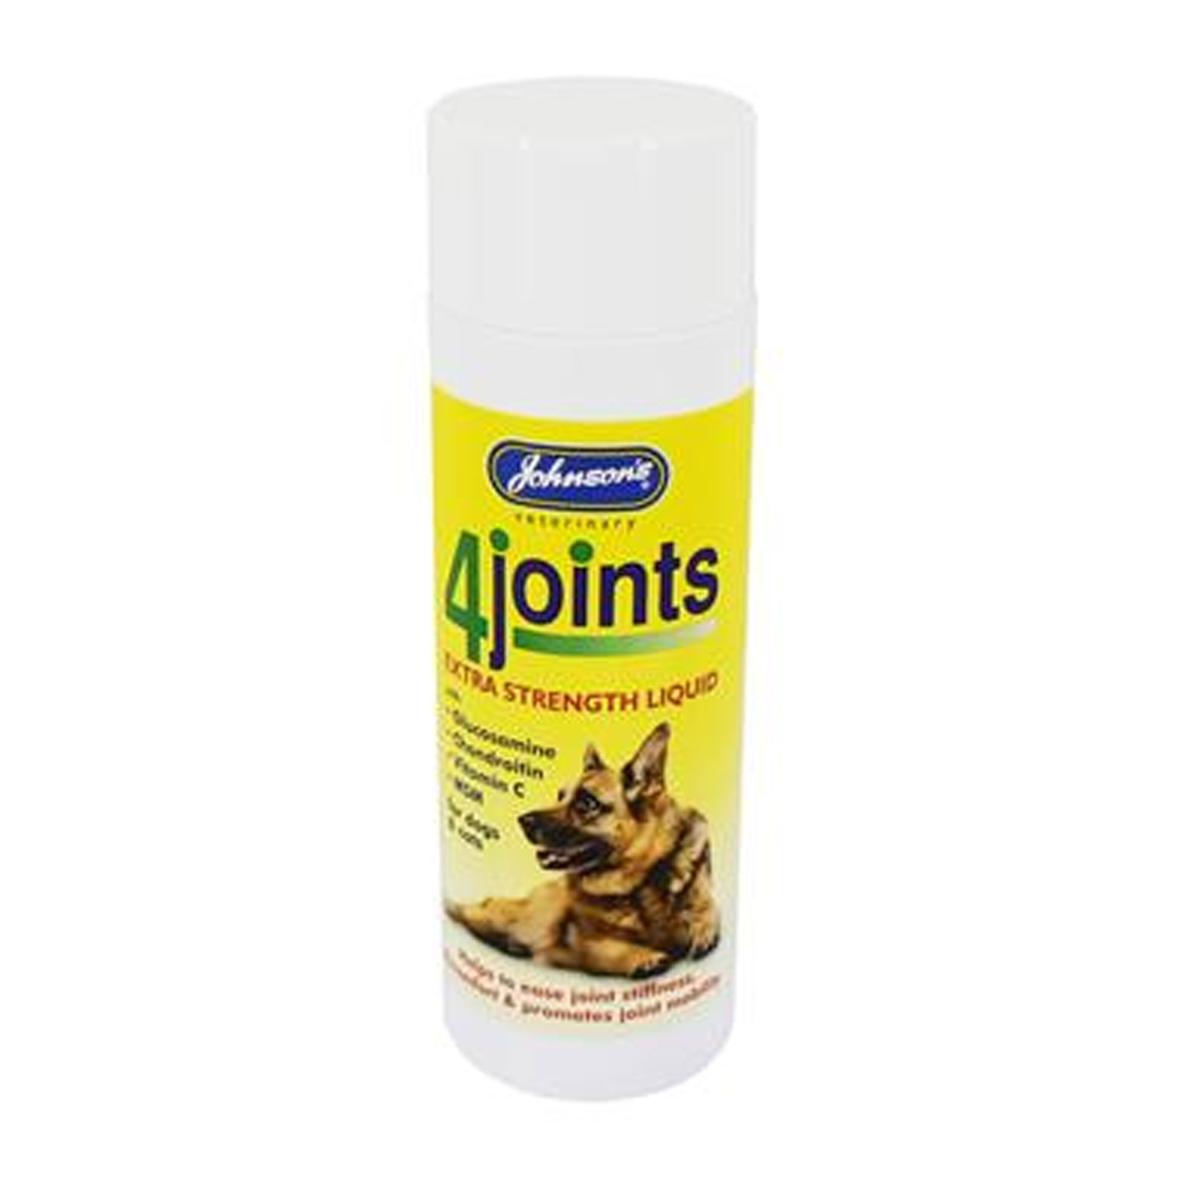 Johnson's Veterinary | Dog Joint Supplement | 4Joints Mobility Extra Strength Liquid - 100ml